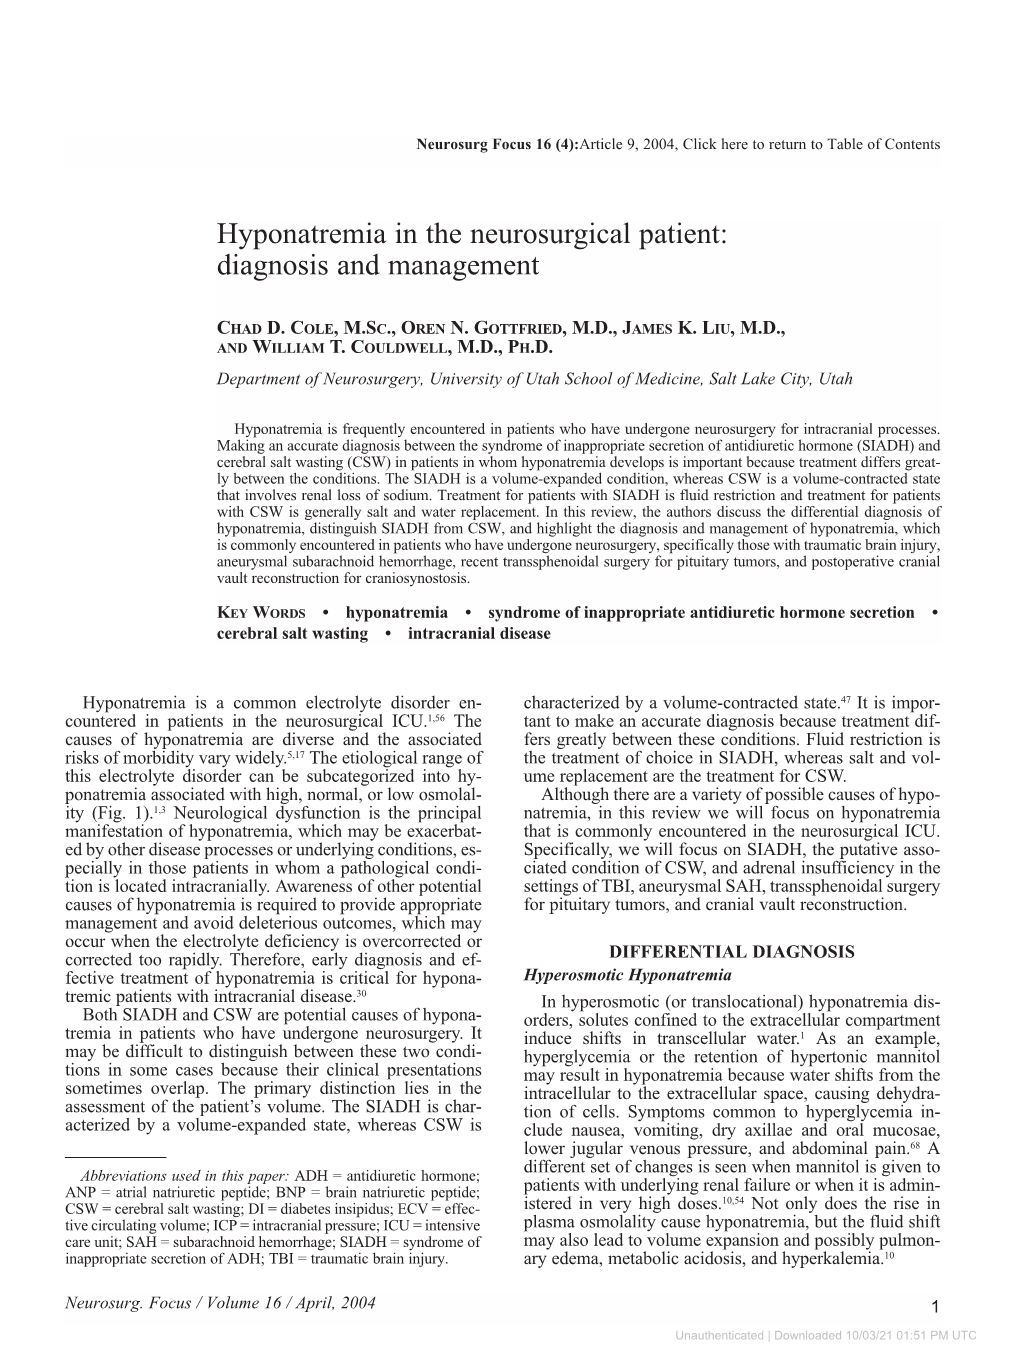 Hyponatremia in the Neurosurgical Patient: Diagnosis and Management